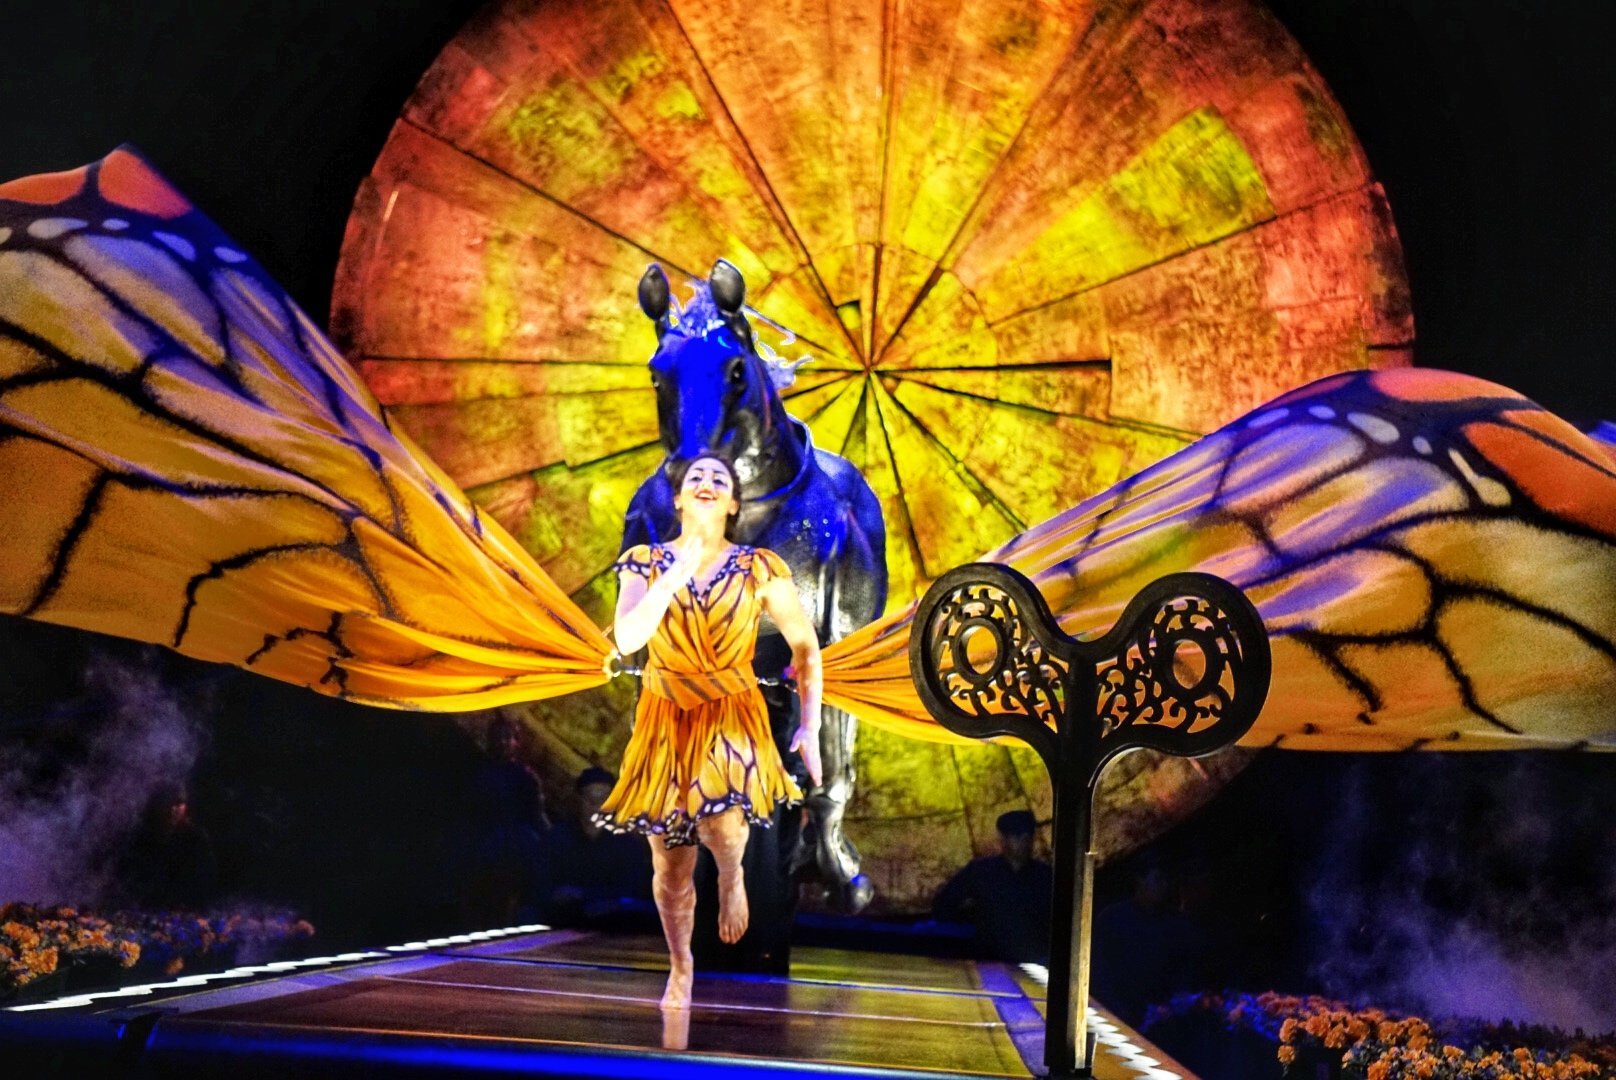 Don’t Miss Your Chance to See the Magical Luzia by Cirque du Soleil in Orange County